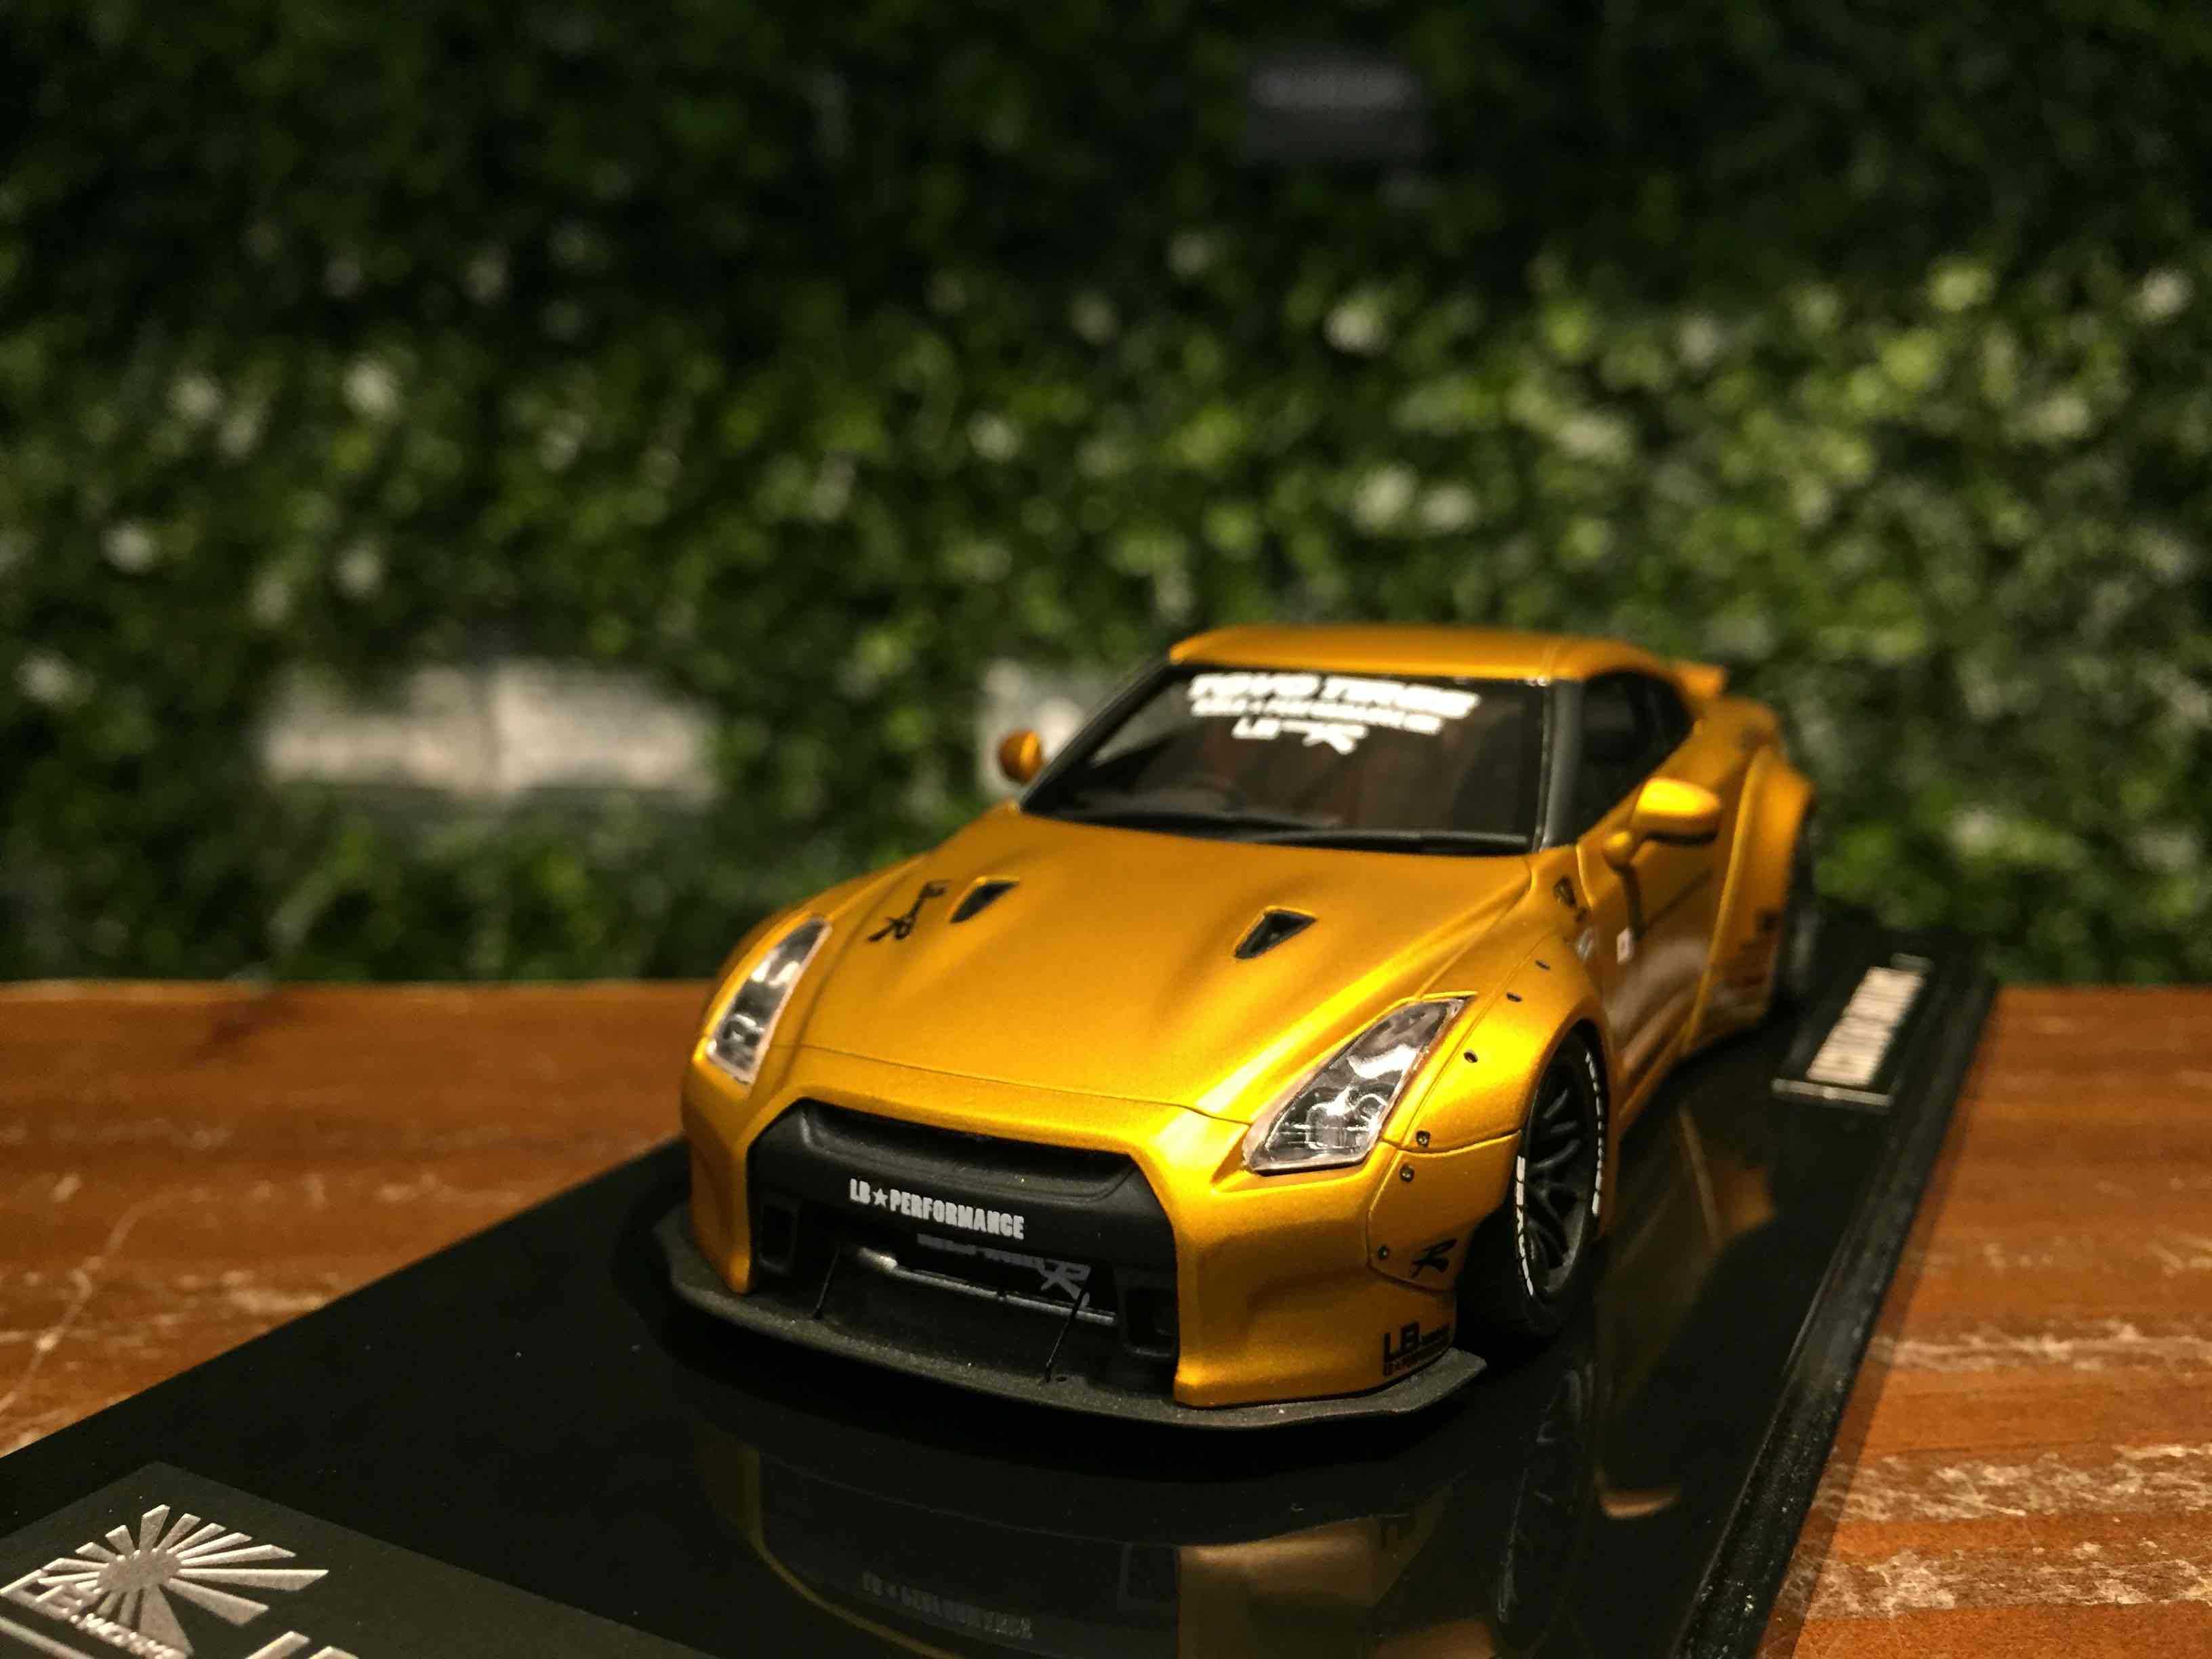 1/43 Onemodel LB-Works Nissan GT-R (R35) Duck Tail Gold【MGM】